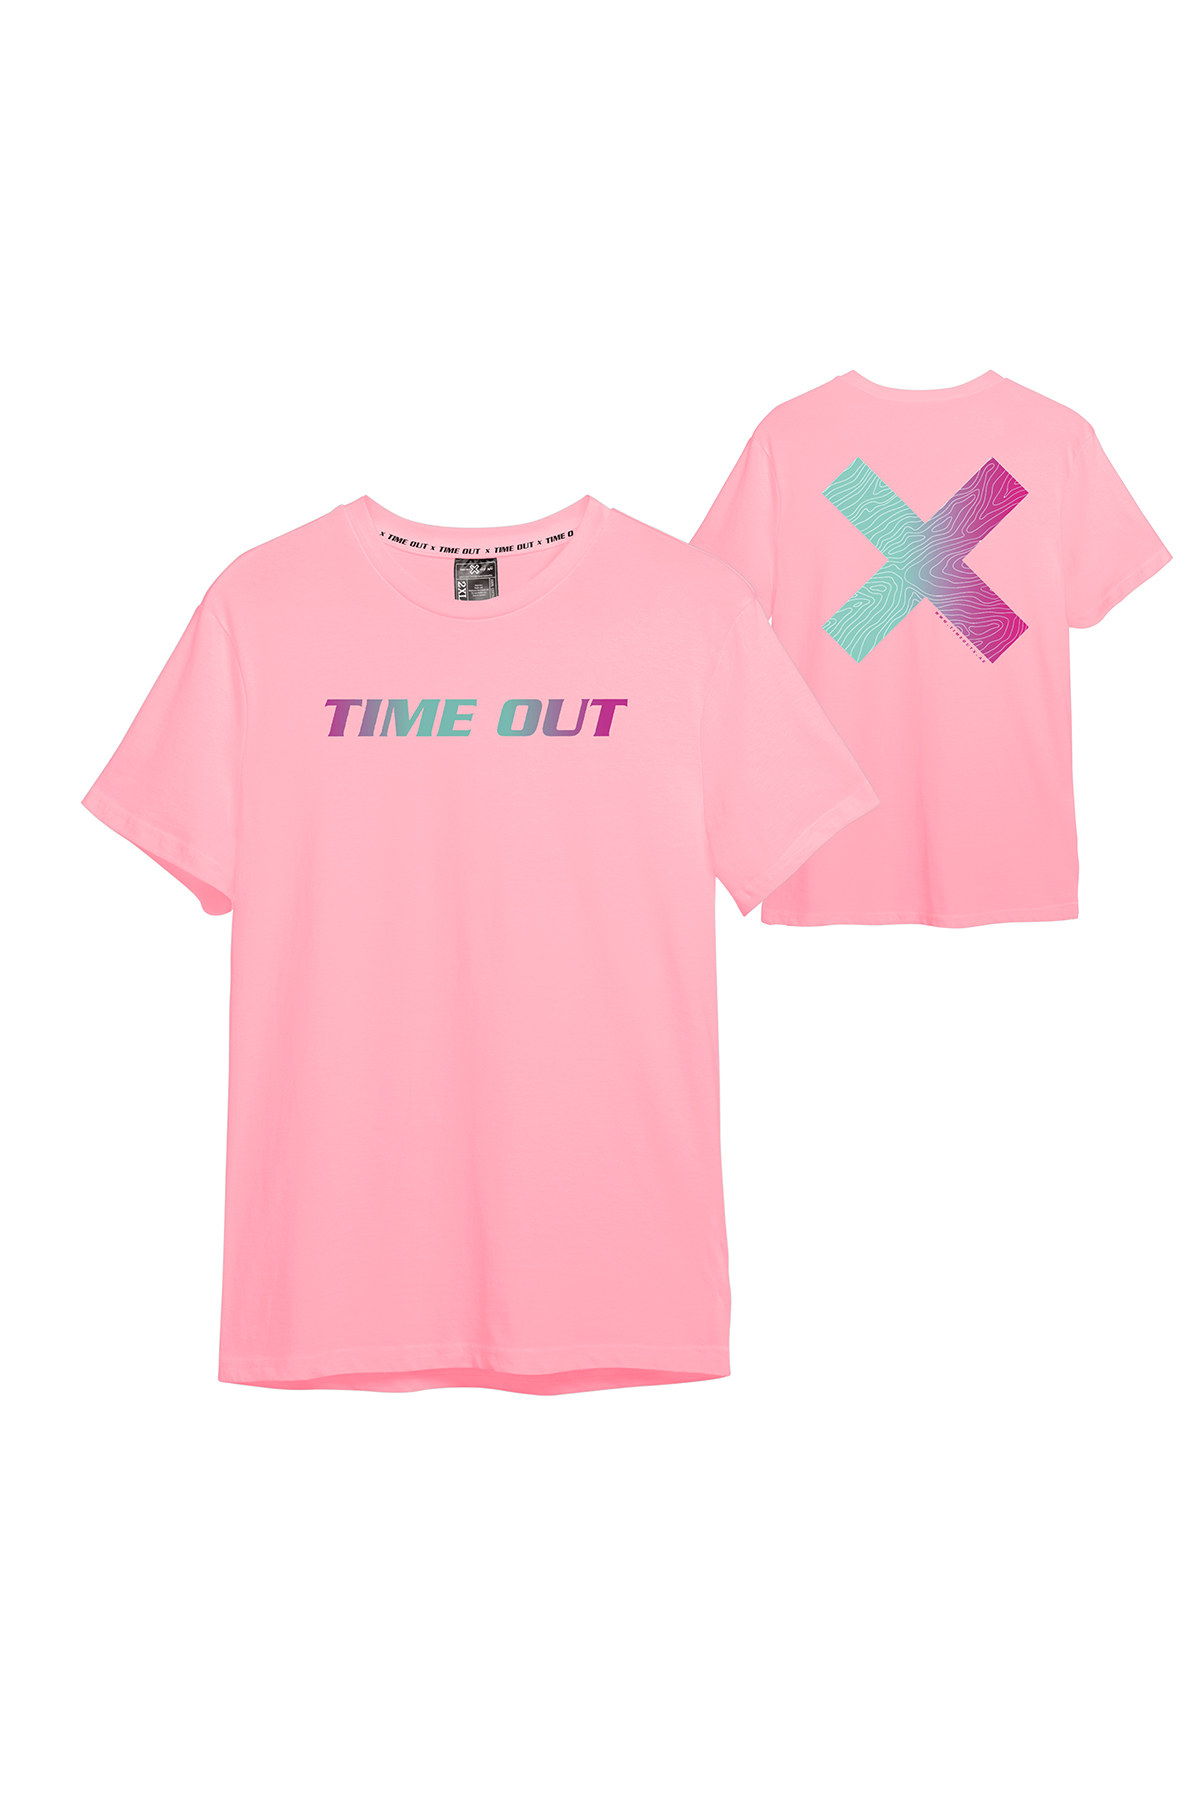 Unisex-Time-Out-X-Signature-Pure-Cotton-Vibrant-Pattern-Pink-T-shirt-for-Kids—Both